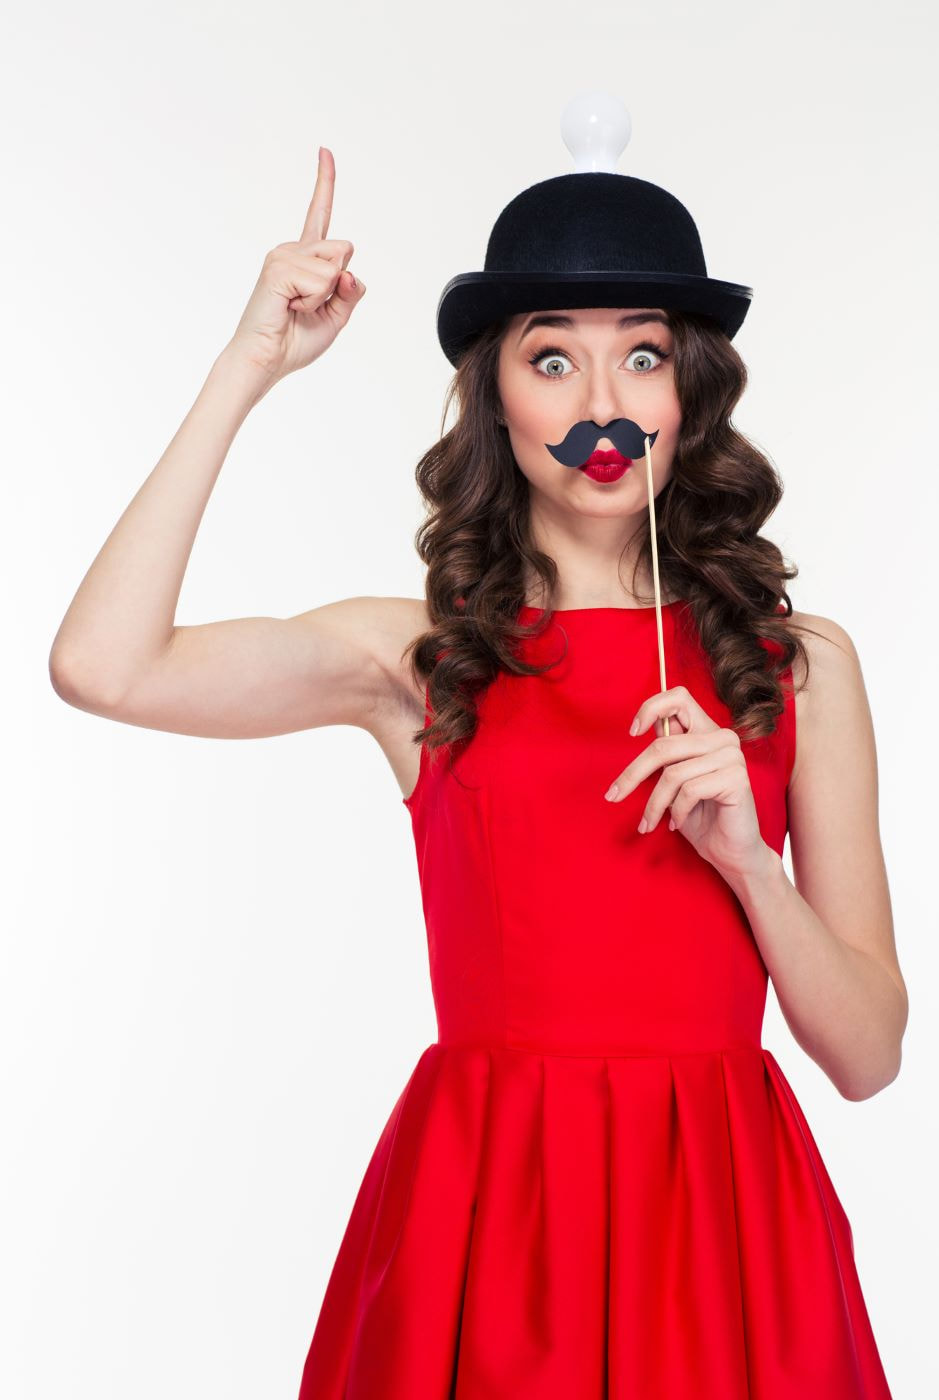 Memorable woman in red dress and photo booth props making funny face Picture